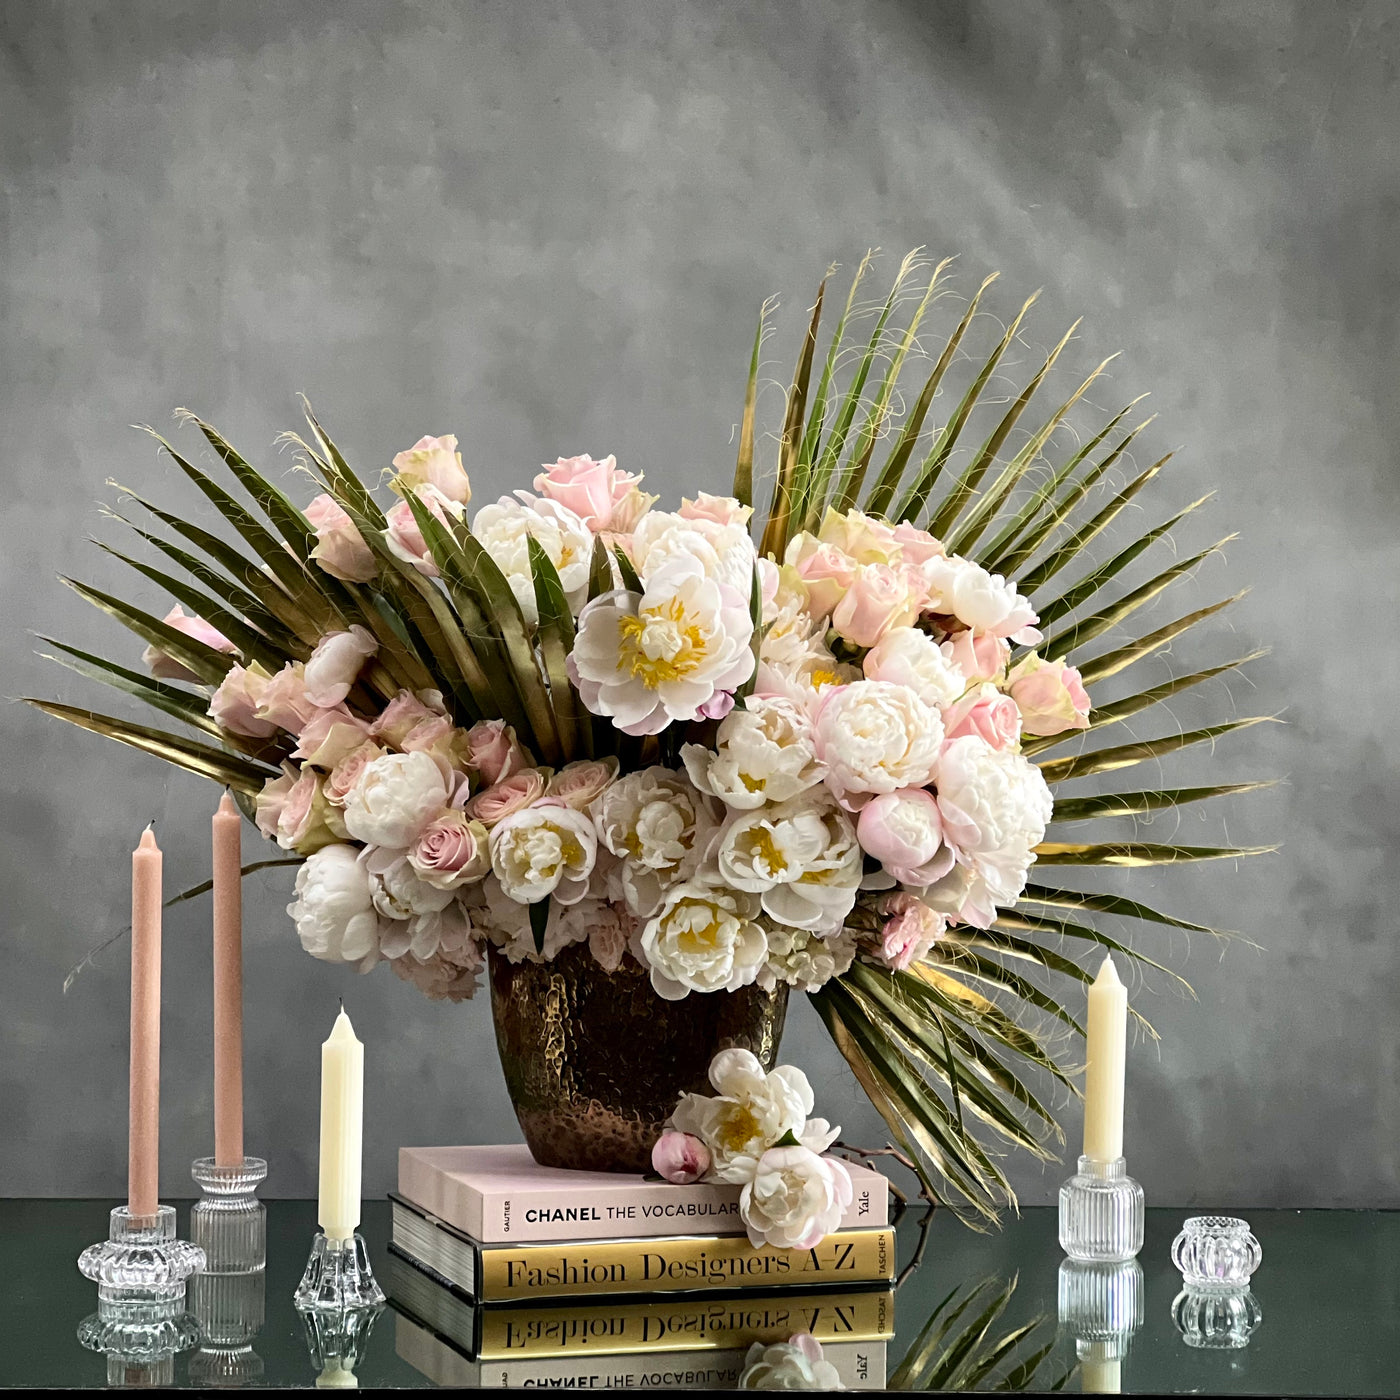 Beverly Hills Florist offers same day delivery ! Arrangement includes White Peonies, Pink Peonies and tropical leaves ! 